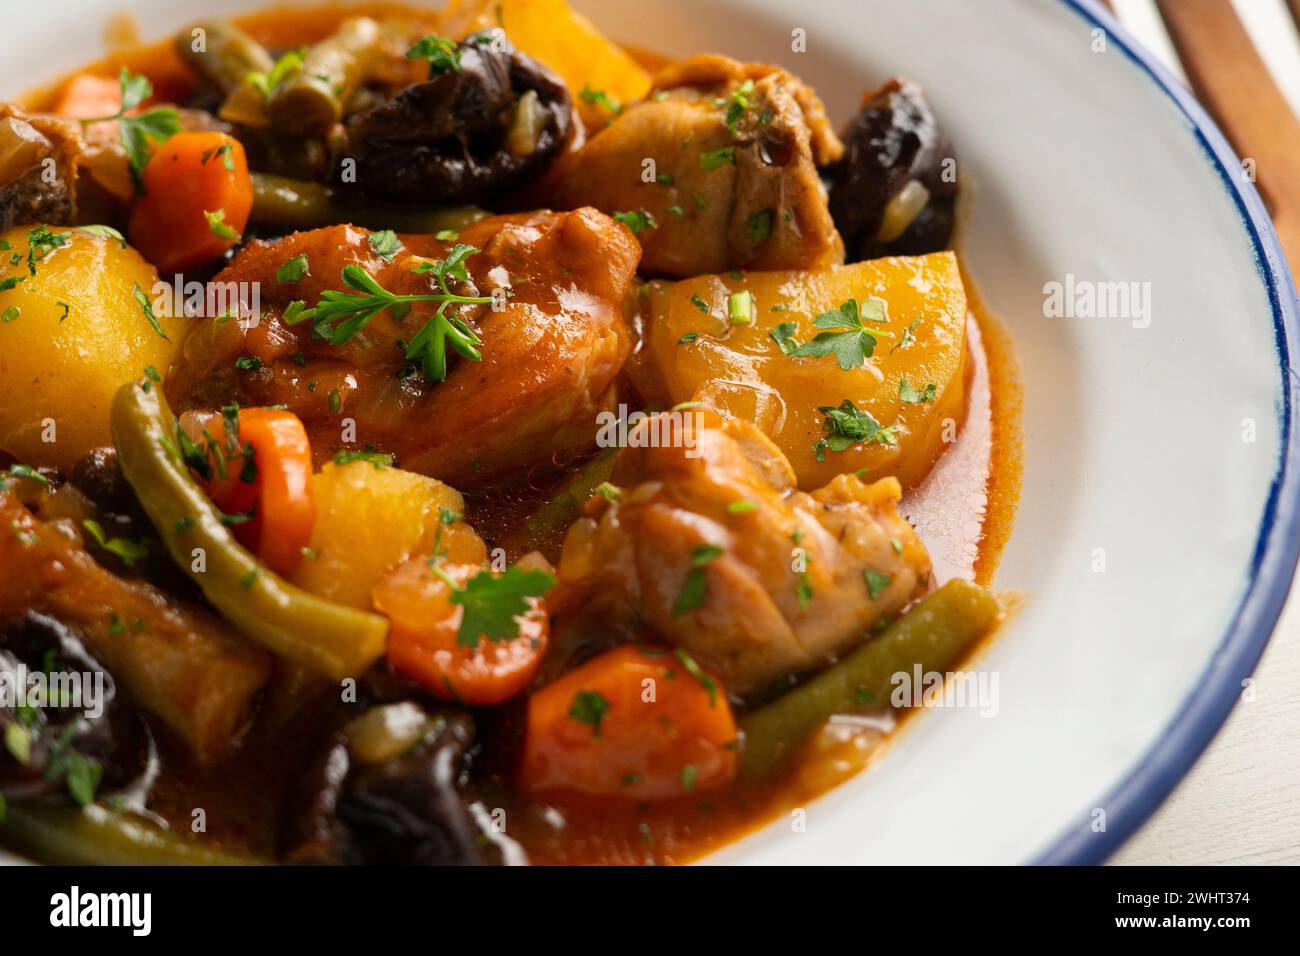 Stewed rabbit with potatoes, green beans, carrots and tomato. Stock Photo